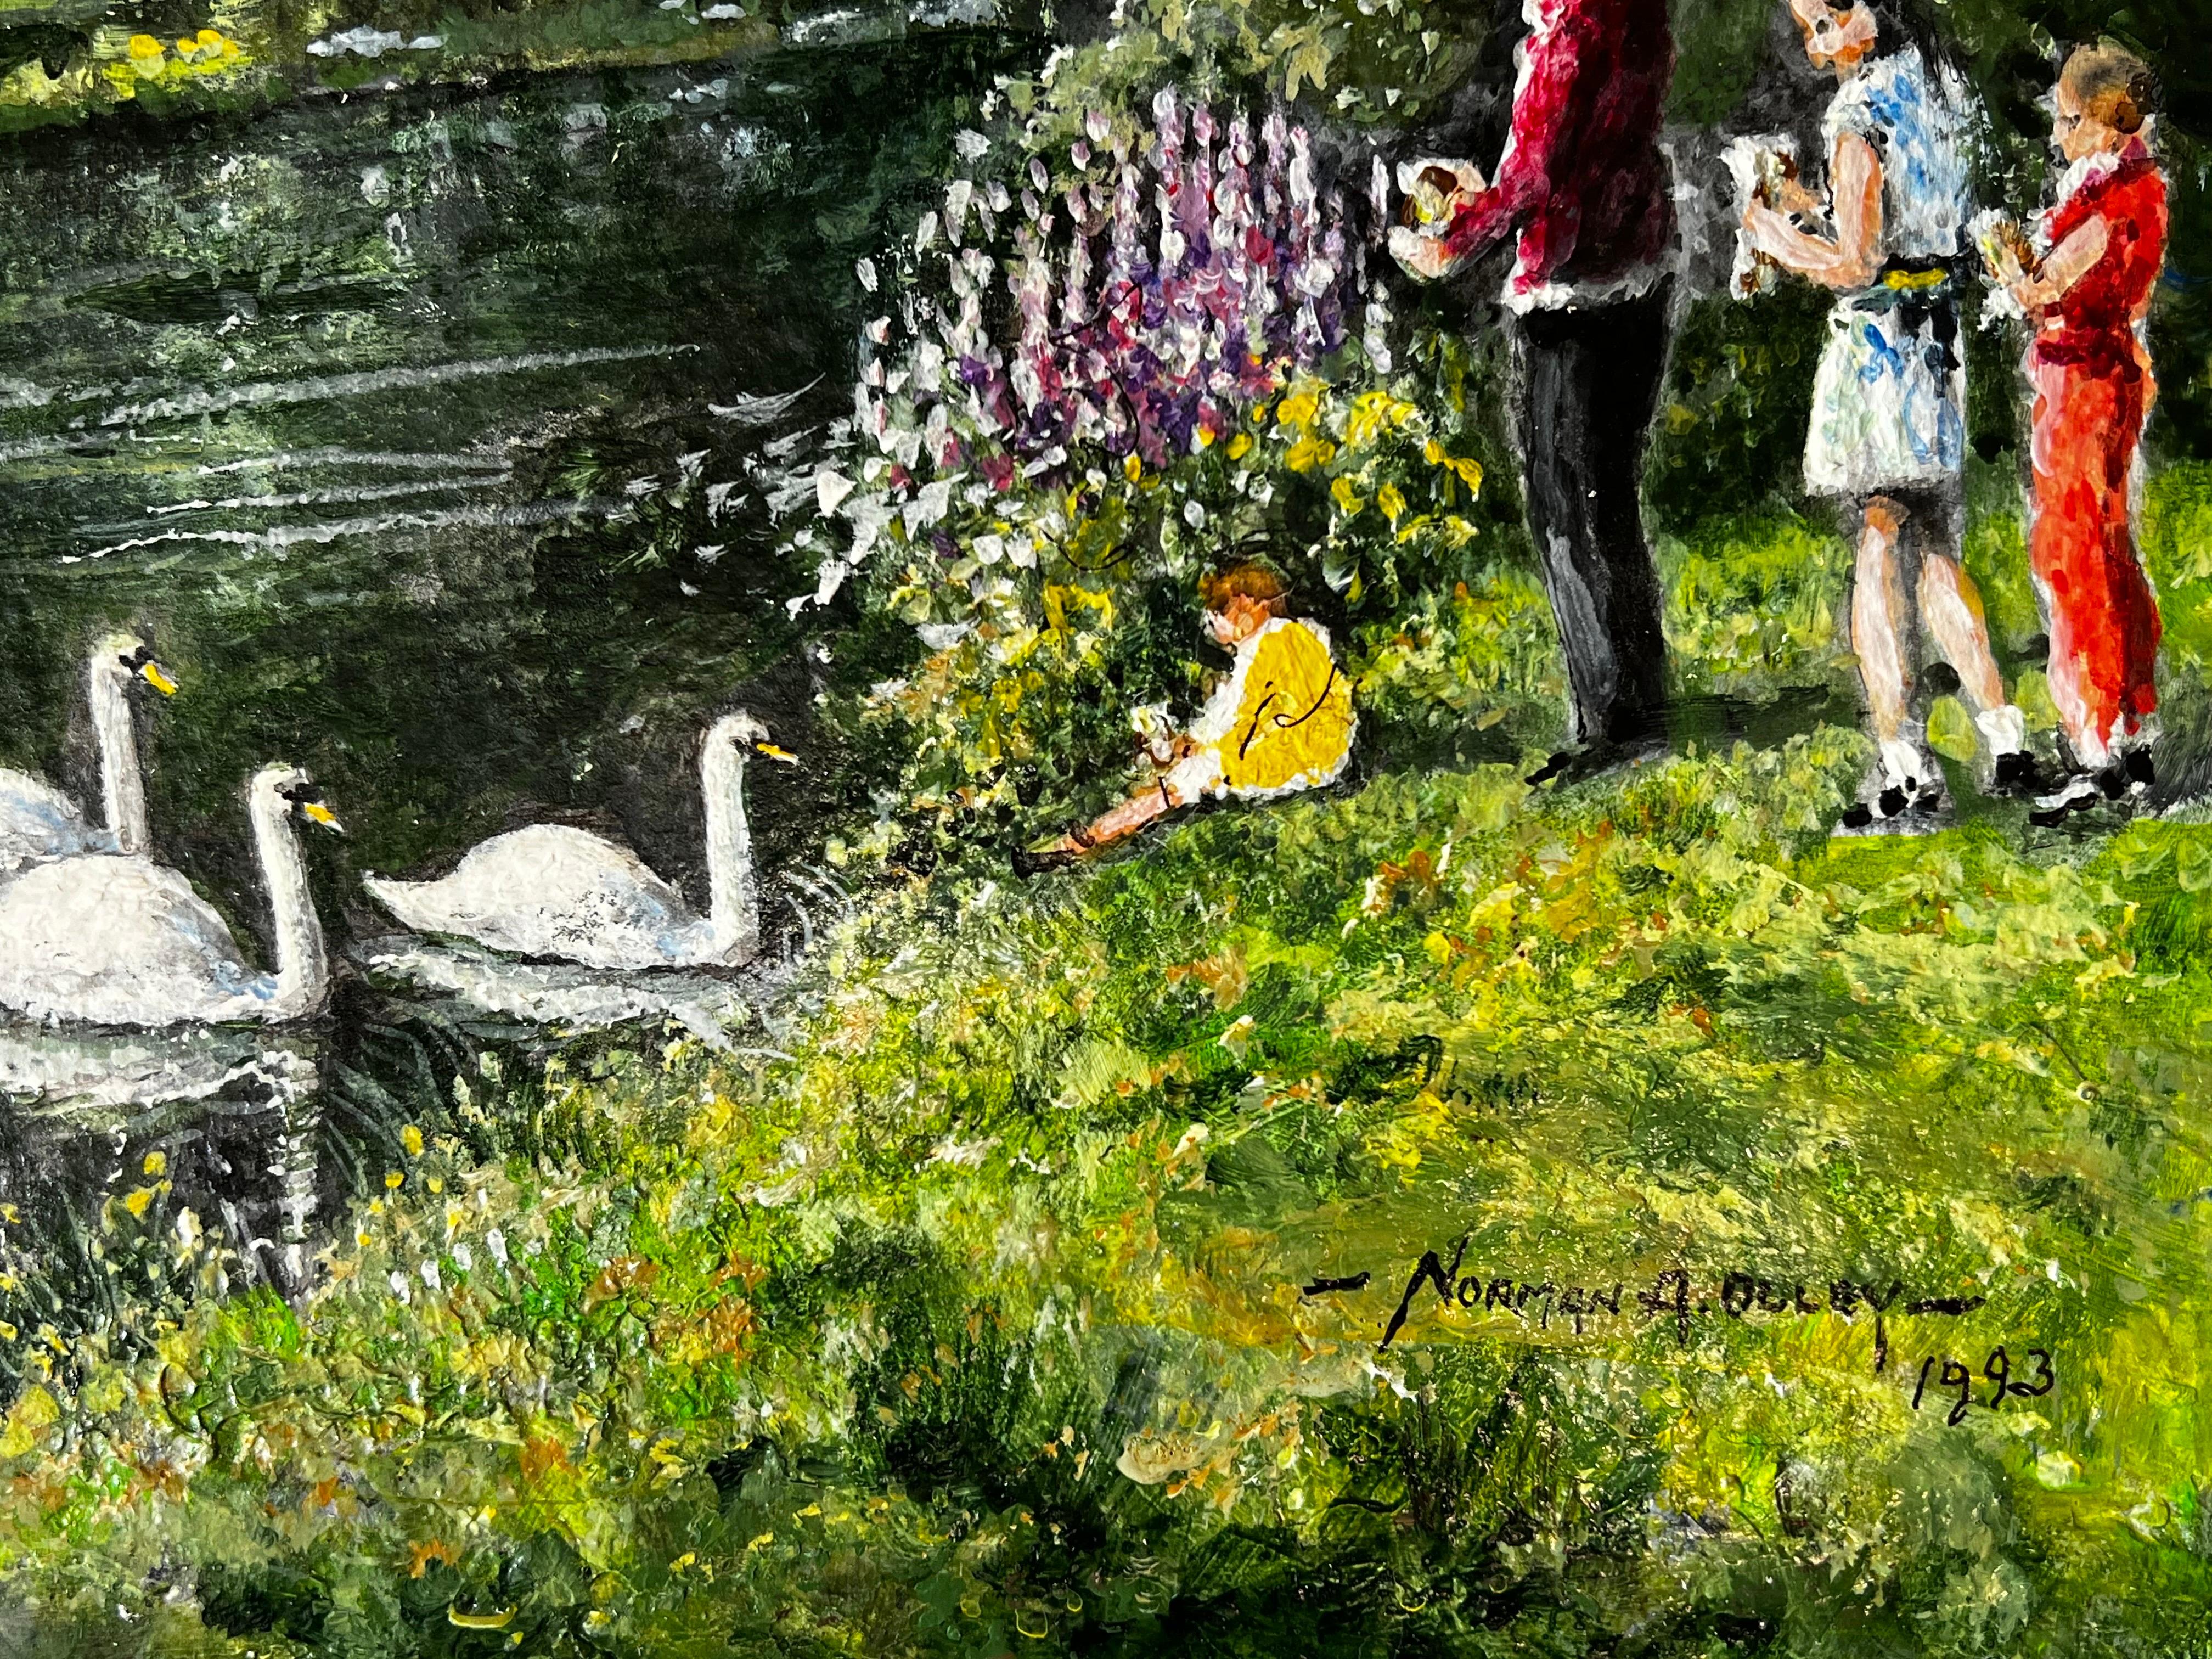 Artist/ School: Norman A.Olley (British, 20th century) dated 1993 and inscribed verso

Title - Feeding The Swans By River Mole, Surrey

Medium: gouache/watercolour/ ink/ pencil on thin board, unframed 

Painting : 10.75 x 14.75 inches

Provenance: